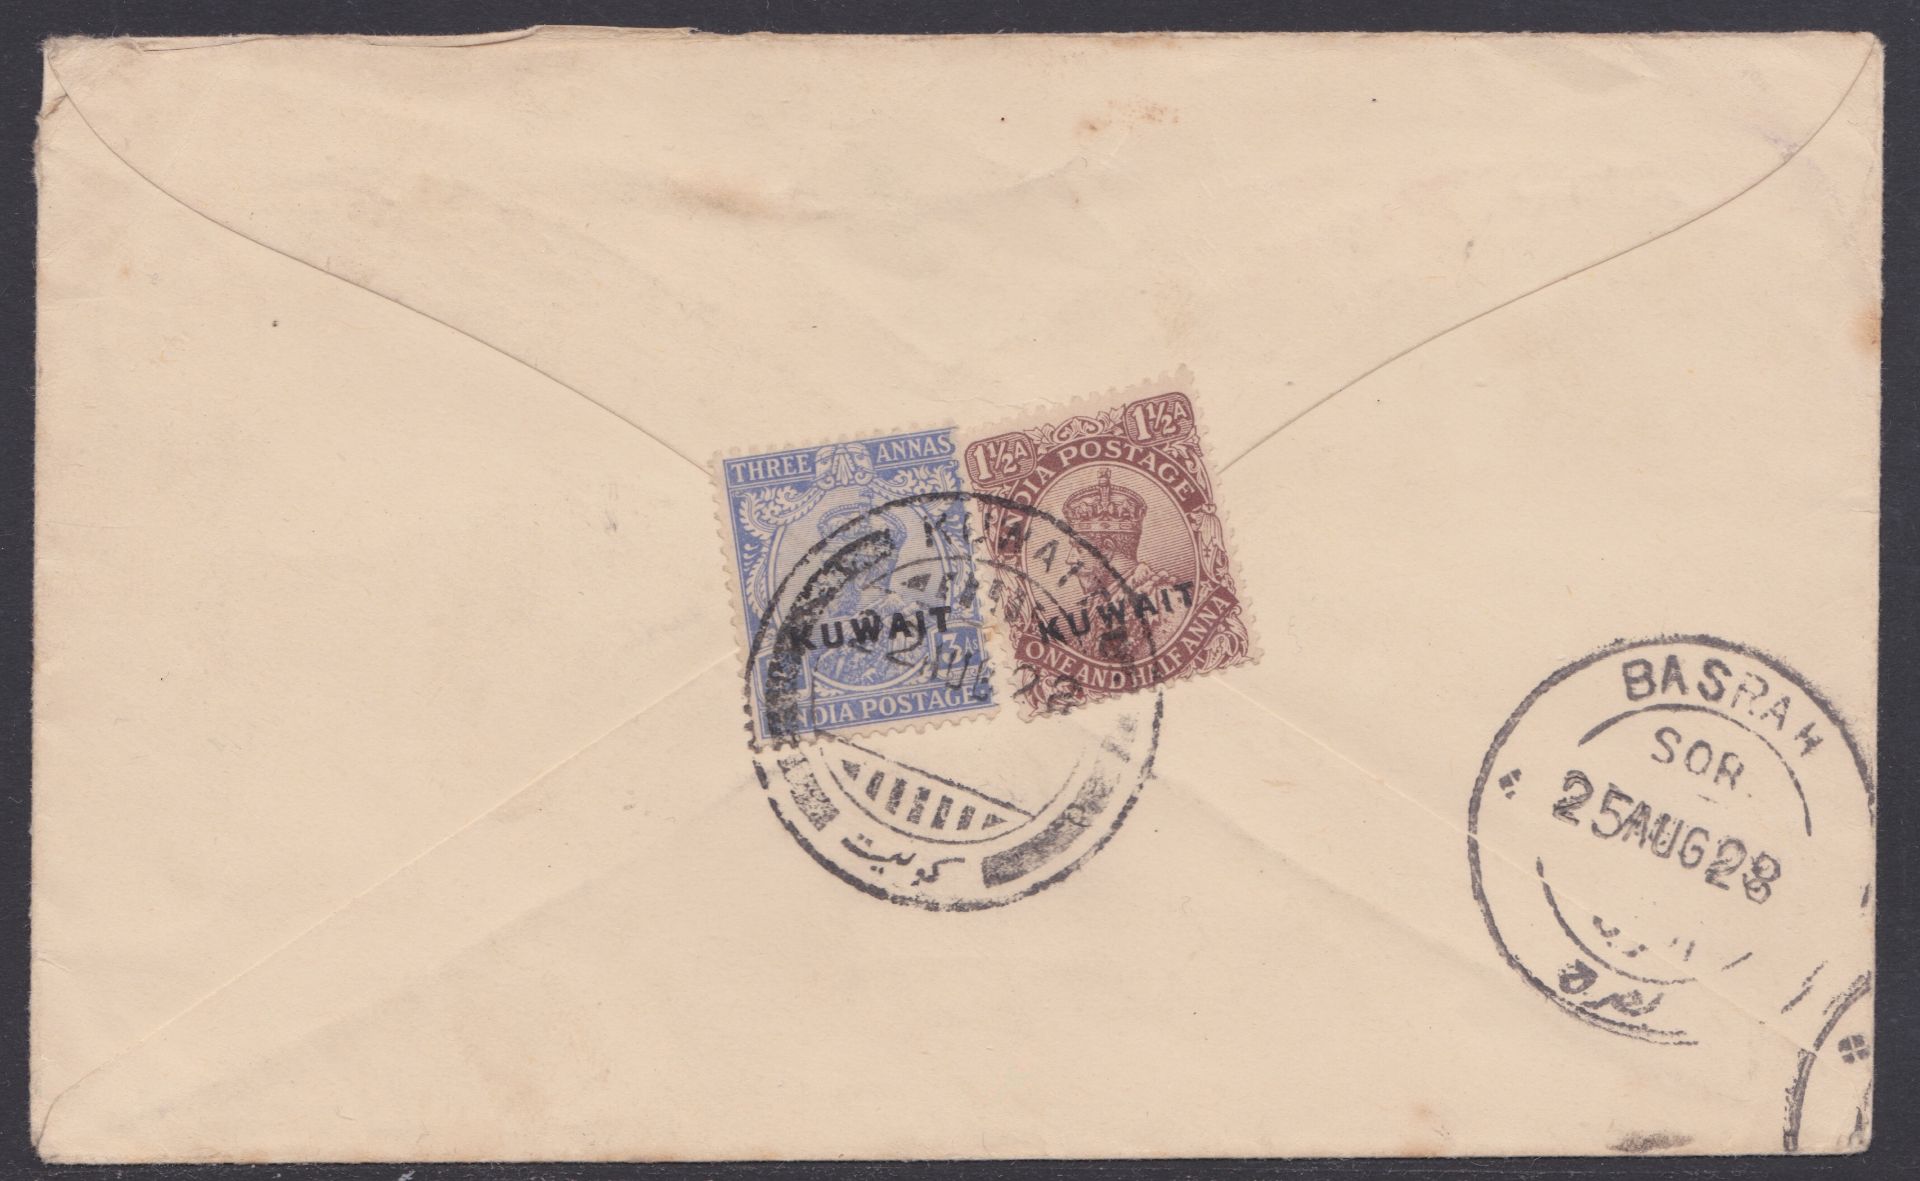 KUWAIT 1928 (Aug 22) - Cover to Scotland endorsed "Air mail Basra - Cairo" franked on the reverse by - Image 2 of 2